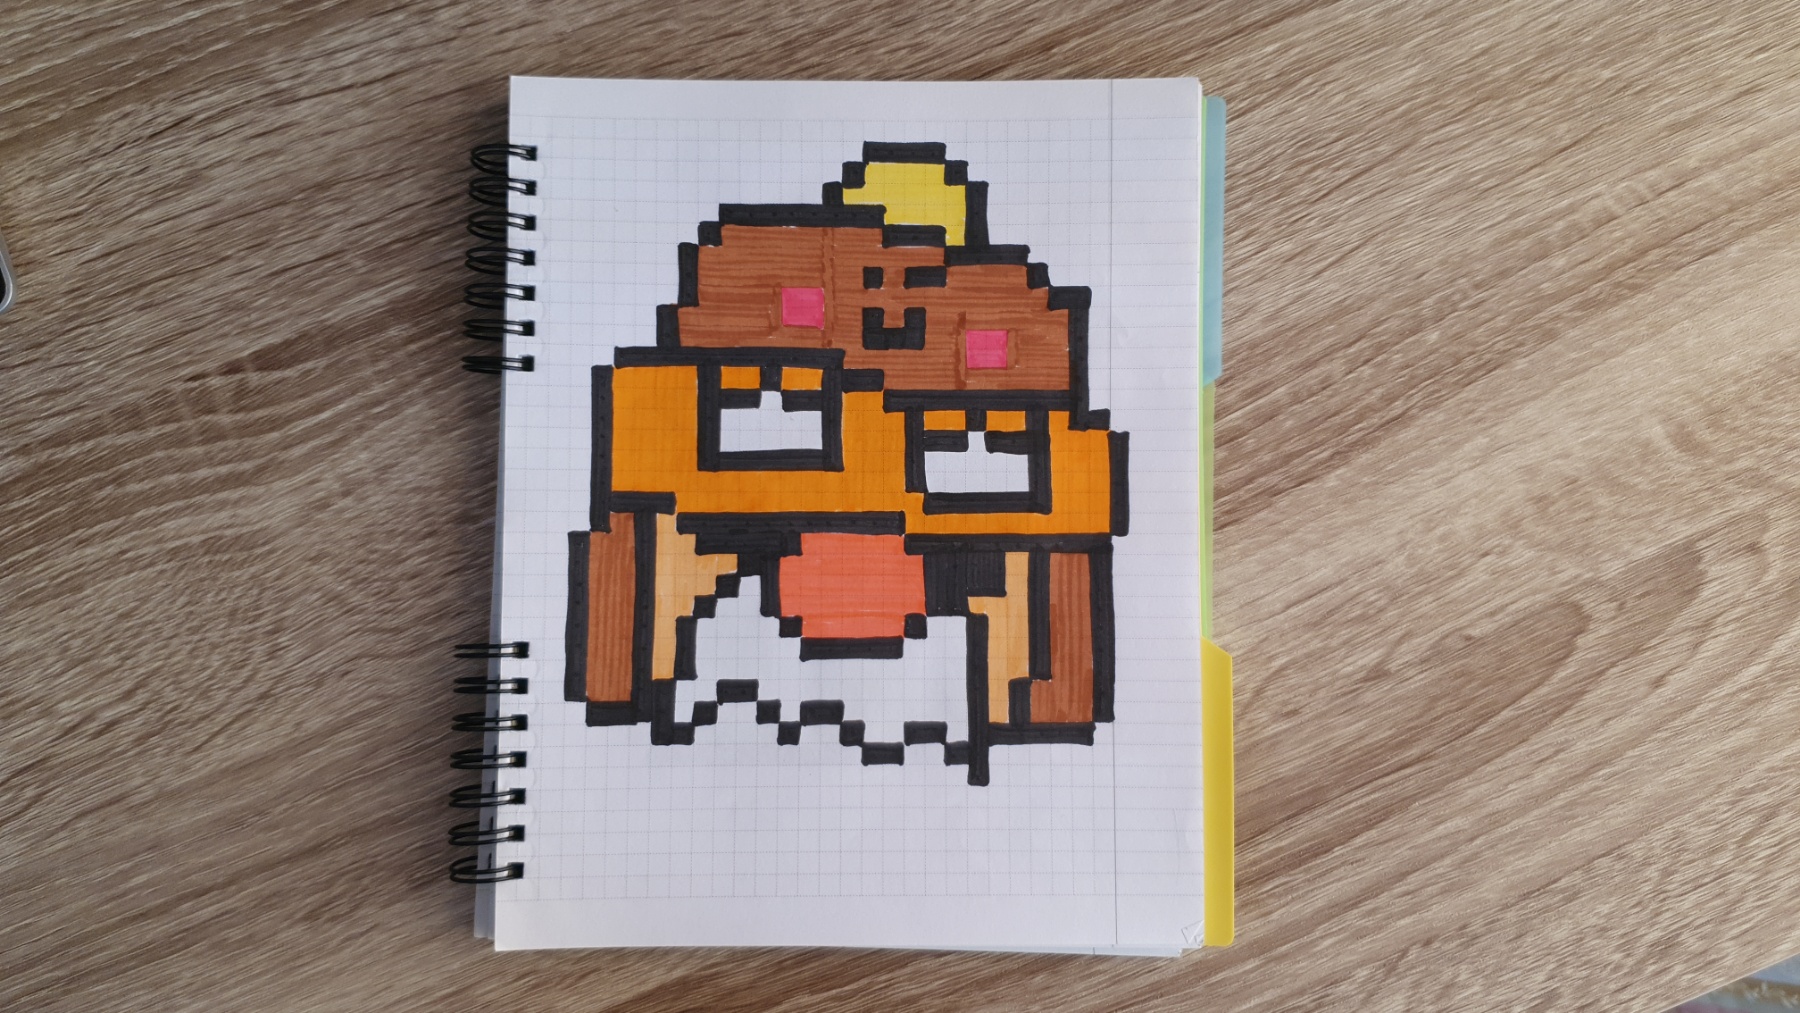 Trader Gale From Brawl Stars Pixel Art Baby Sos - brawl stars pixel art